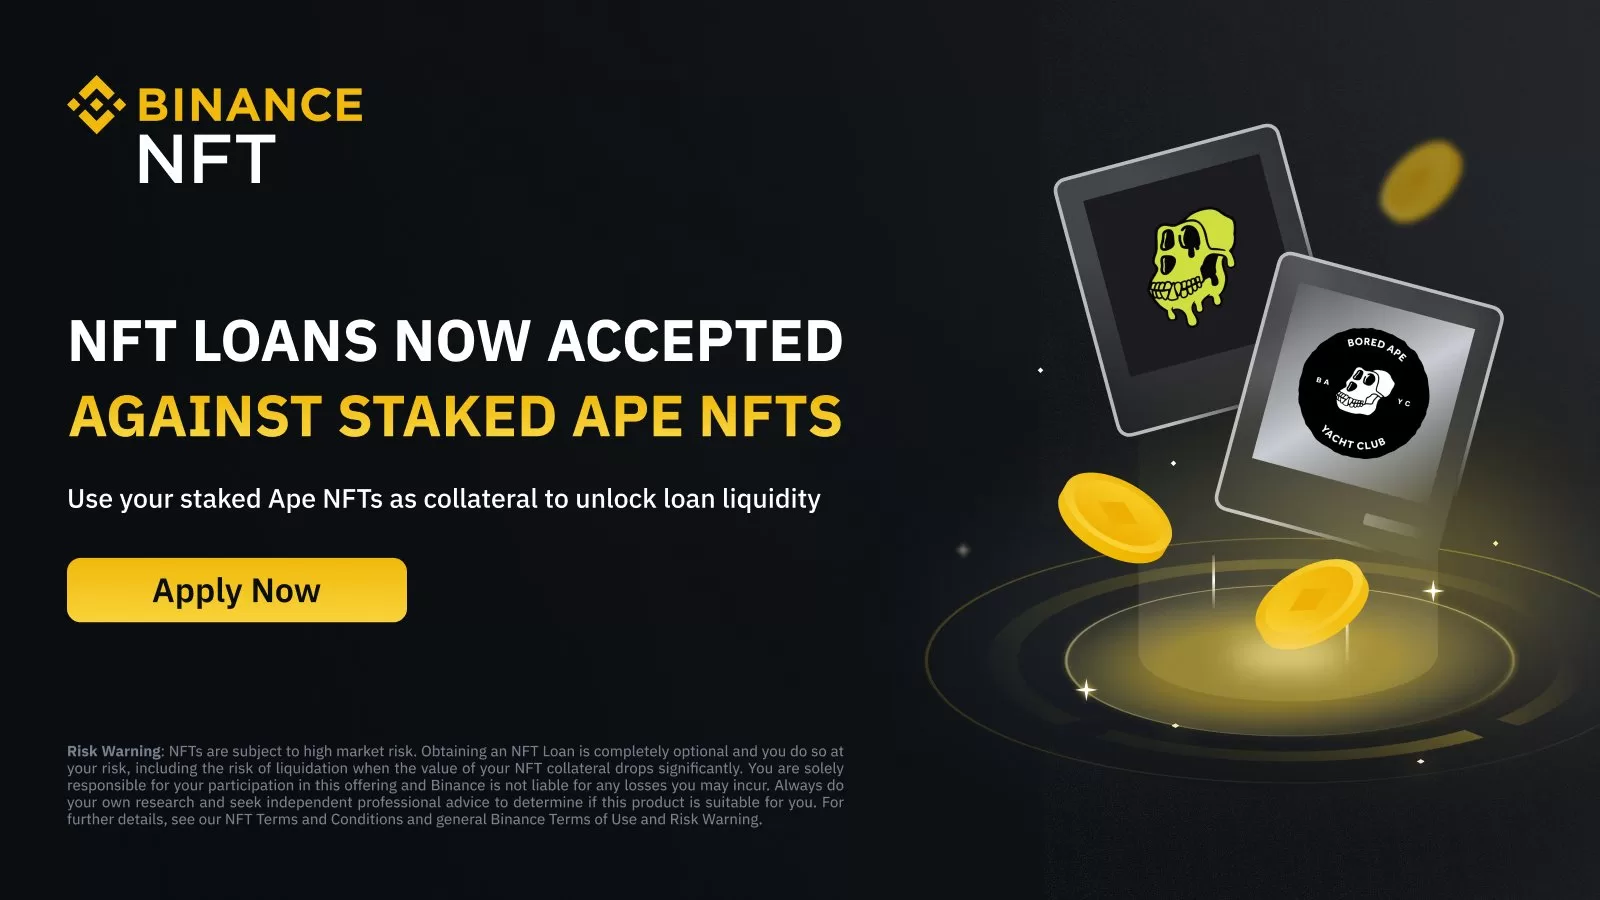 Binance NFT Allows Staked Ape NFTs as Loan Collateral 